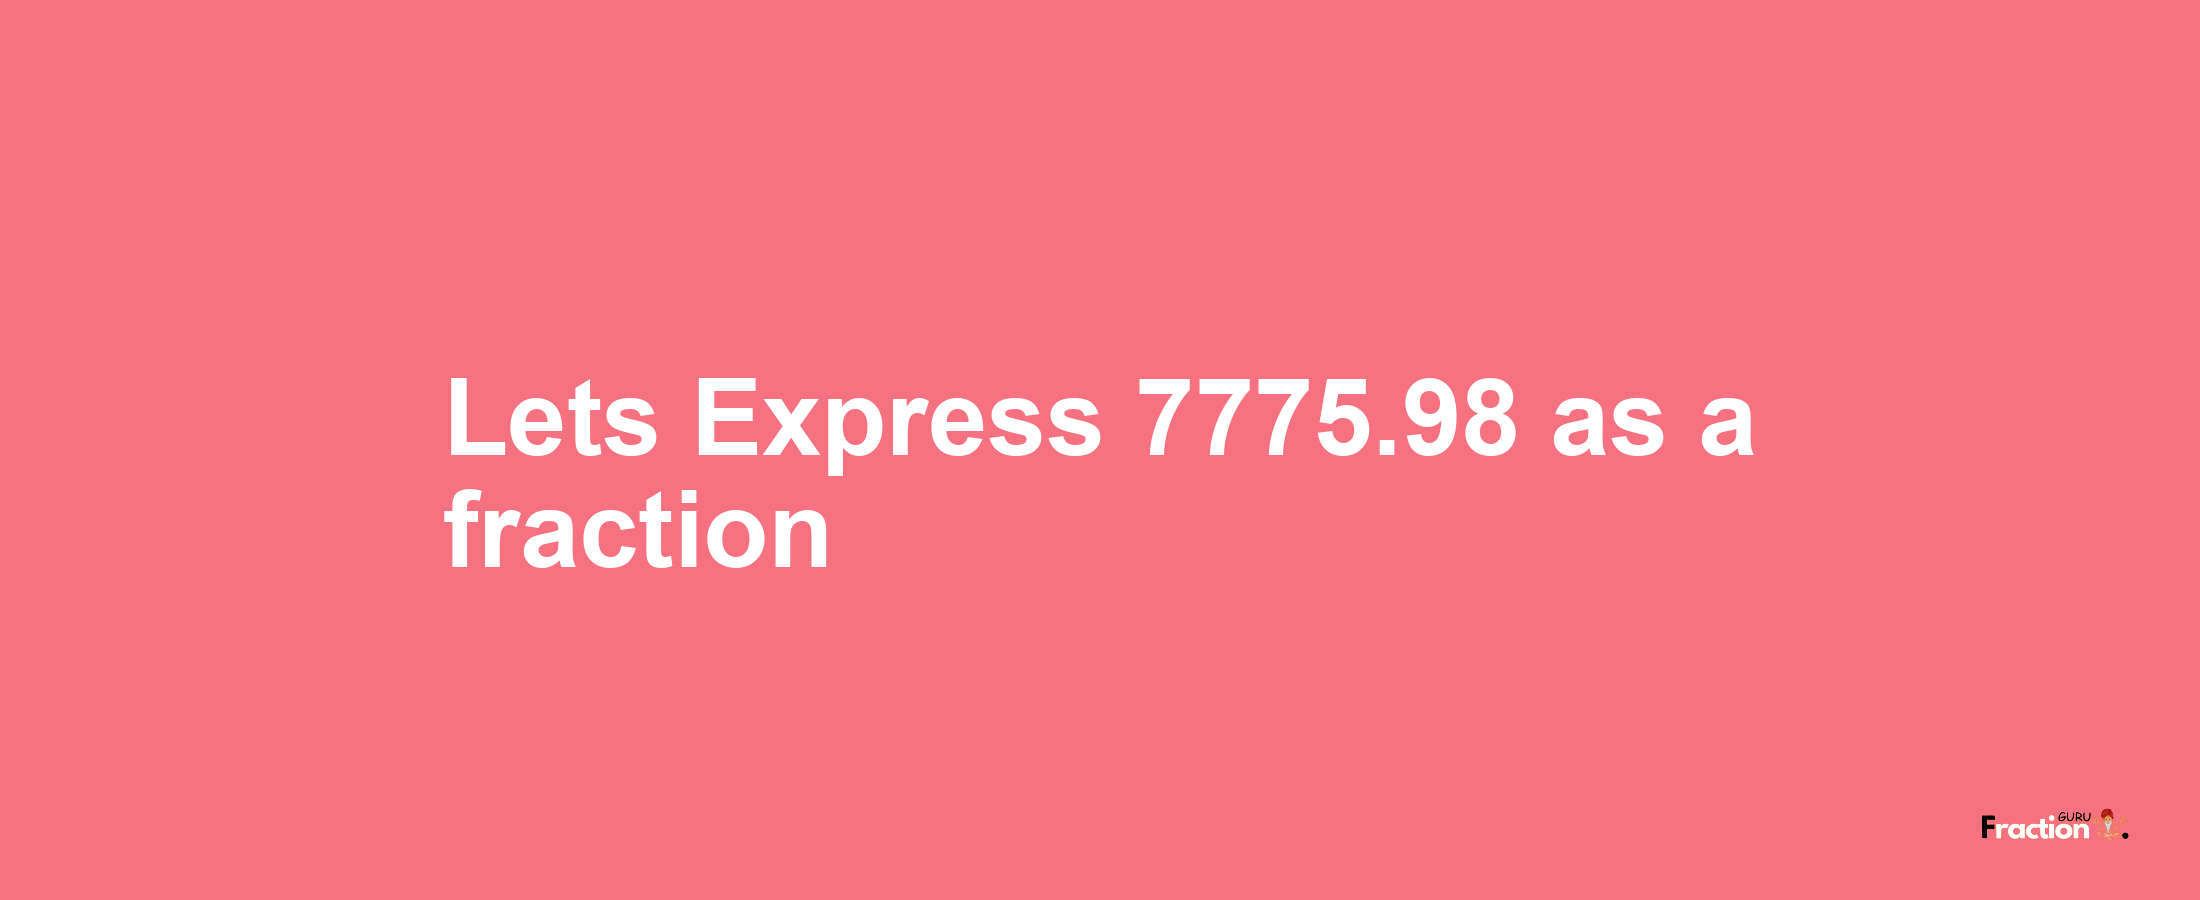 Lets Express 7775.98 as afraction